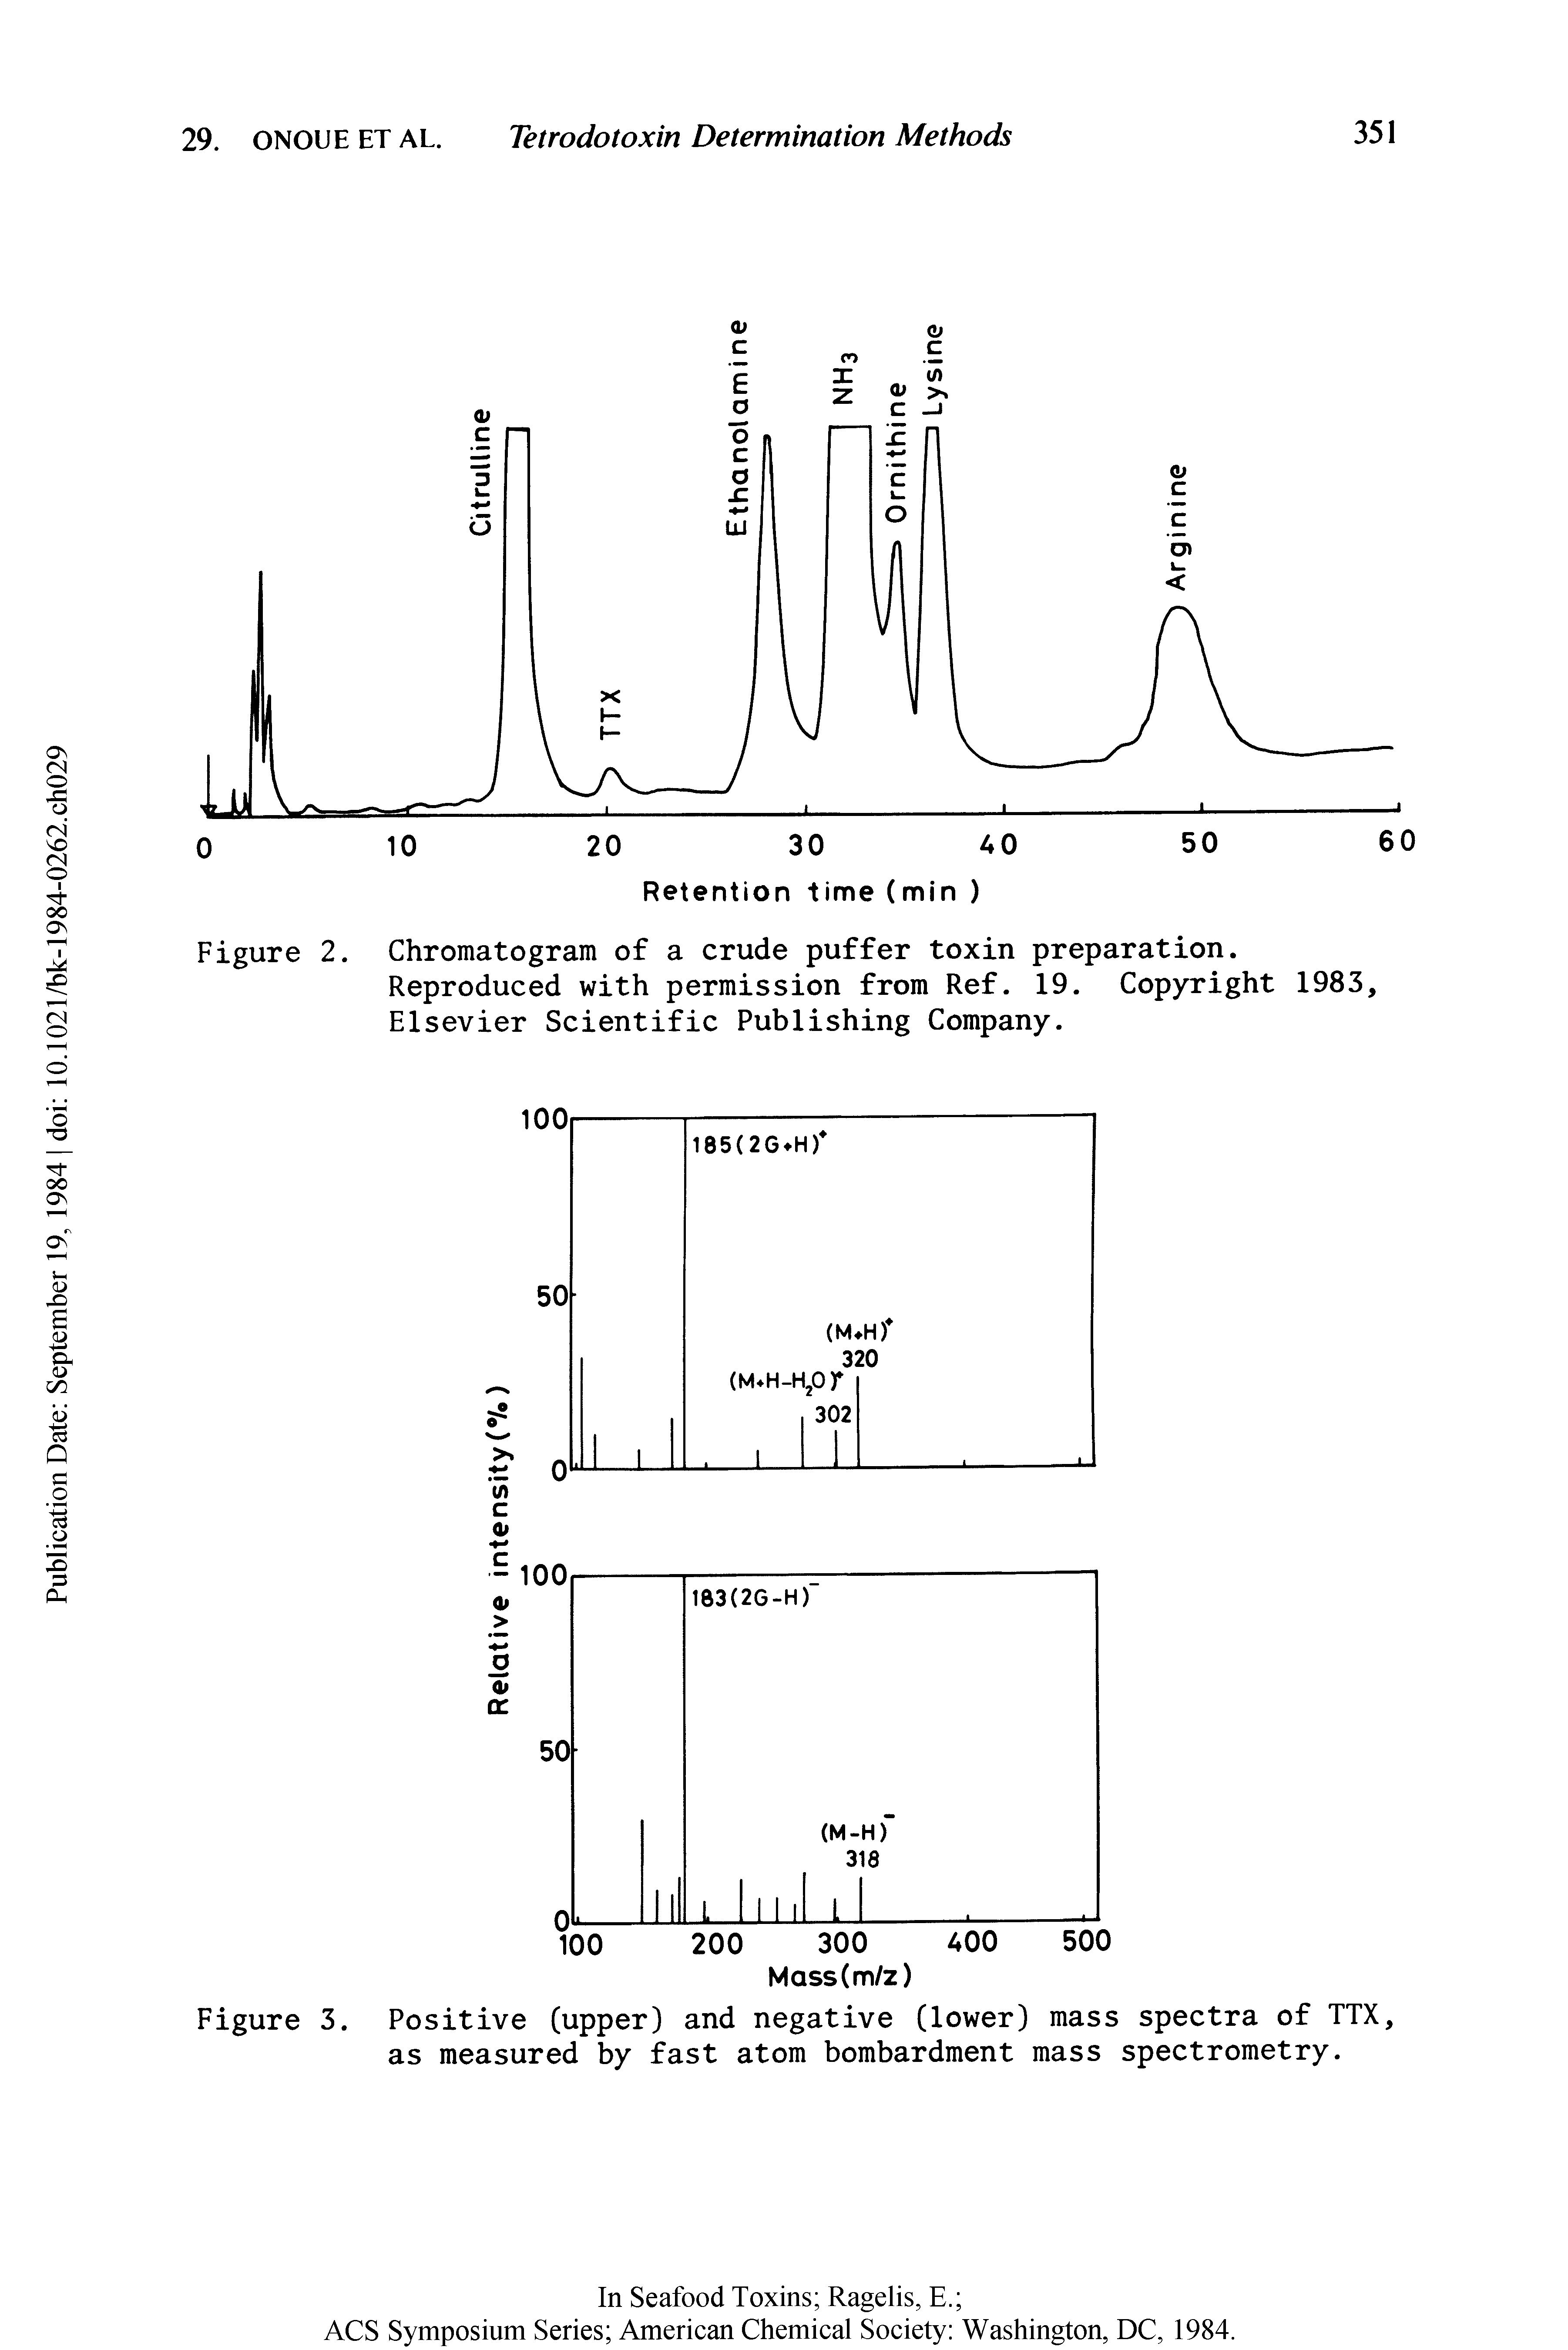 Figure 3. Positive (upper) and negative (lower) mass spectra of TTX, as measured by fast atom bombardment mass spectrometry.